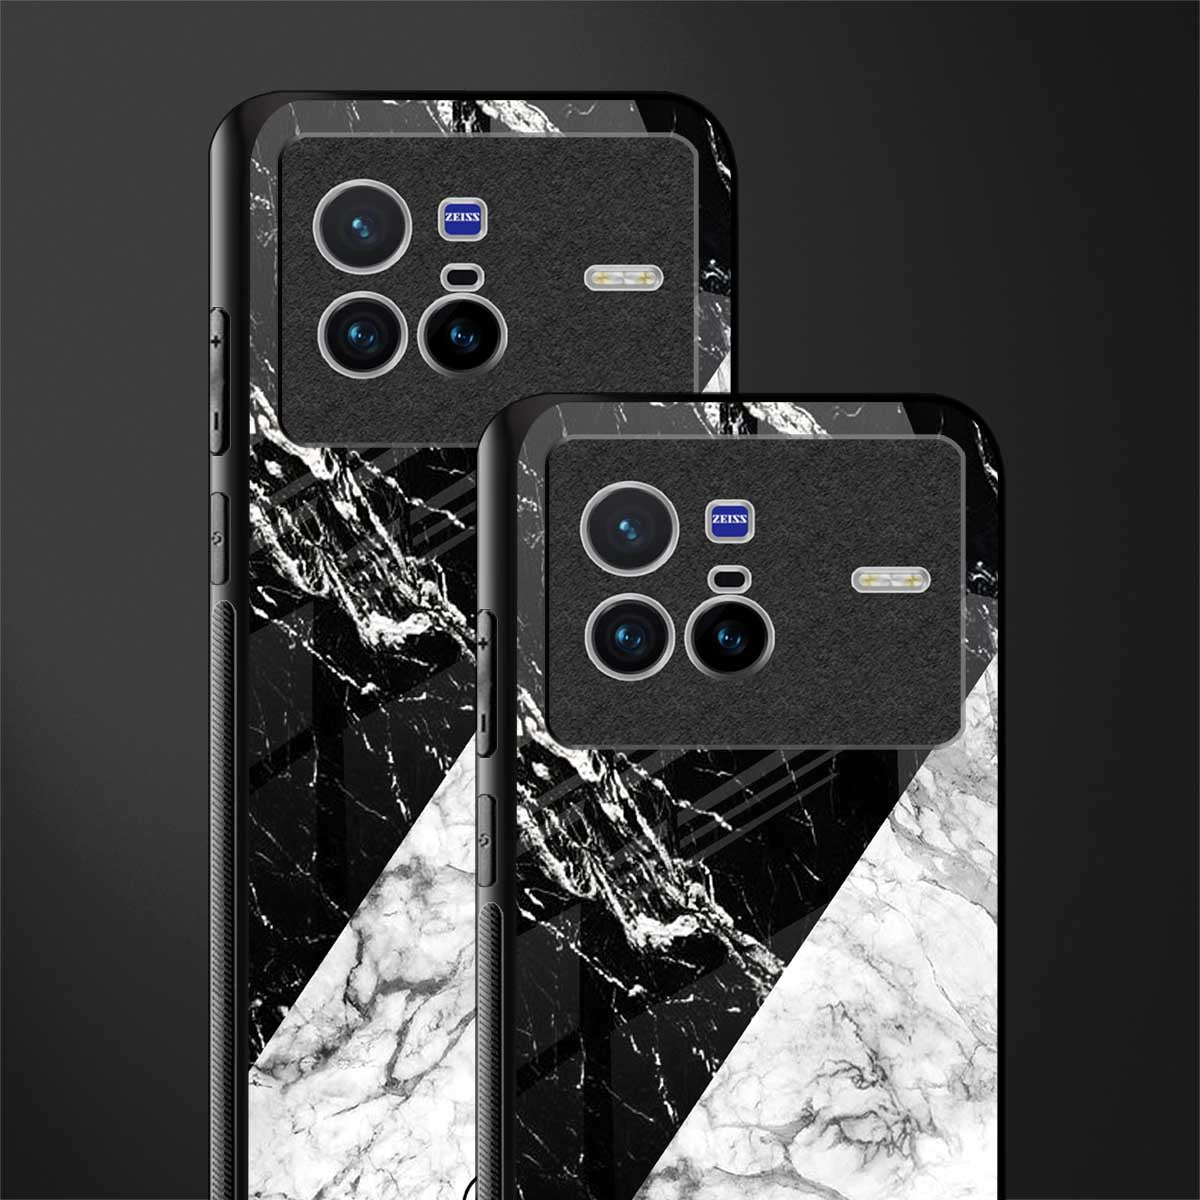 fatal contradiction phone cover for vivo x80